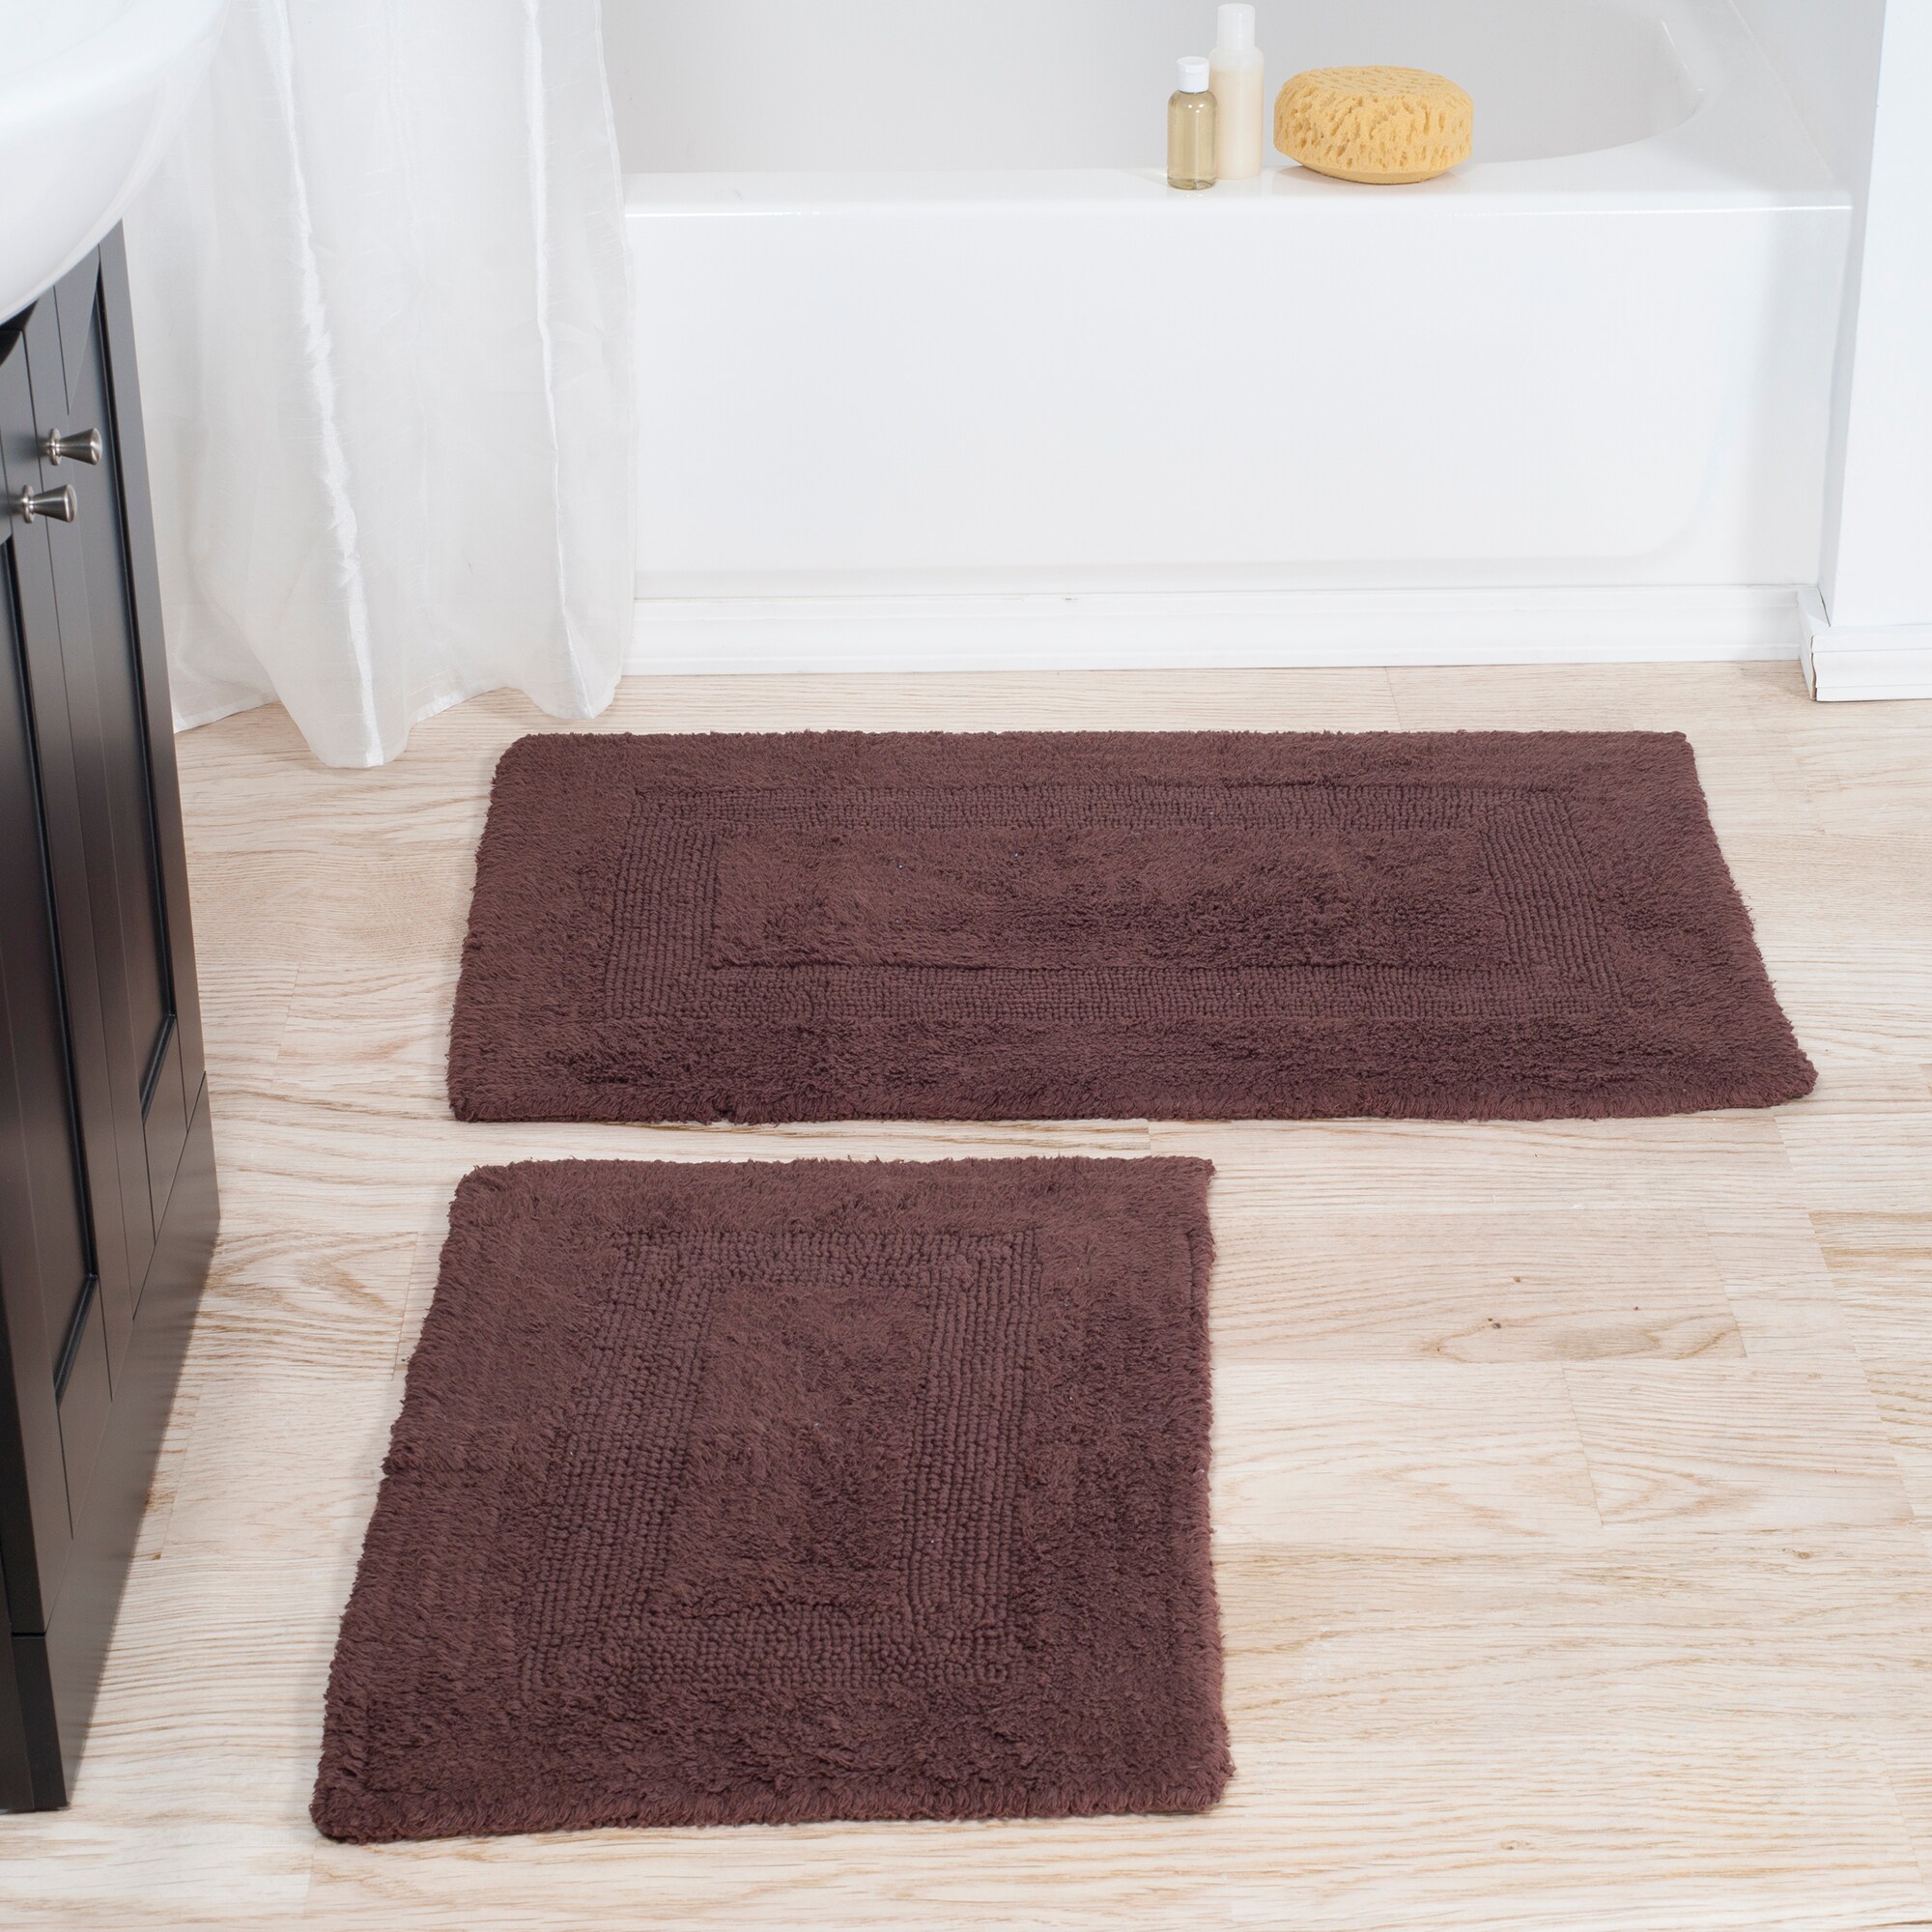 Hastings Home Bathroom Mats 22-in x 35-in Chocolate Cotton Bath